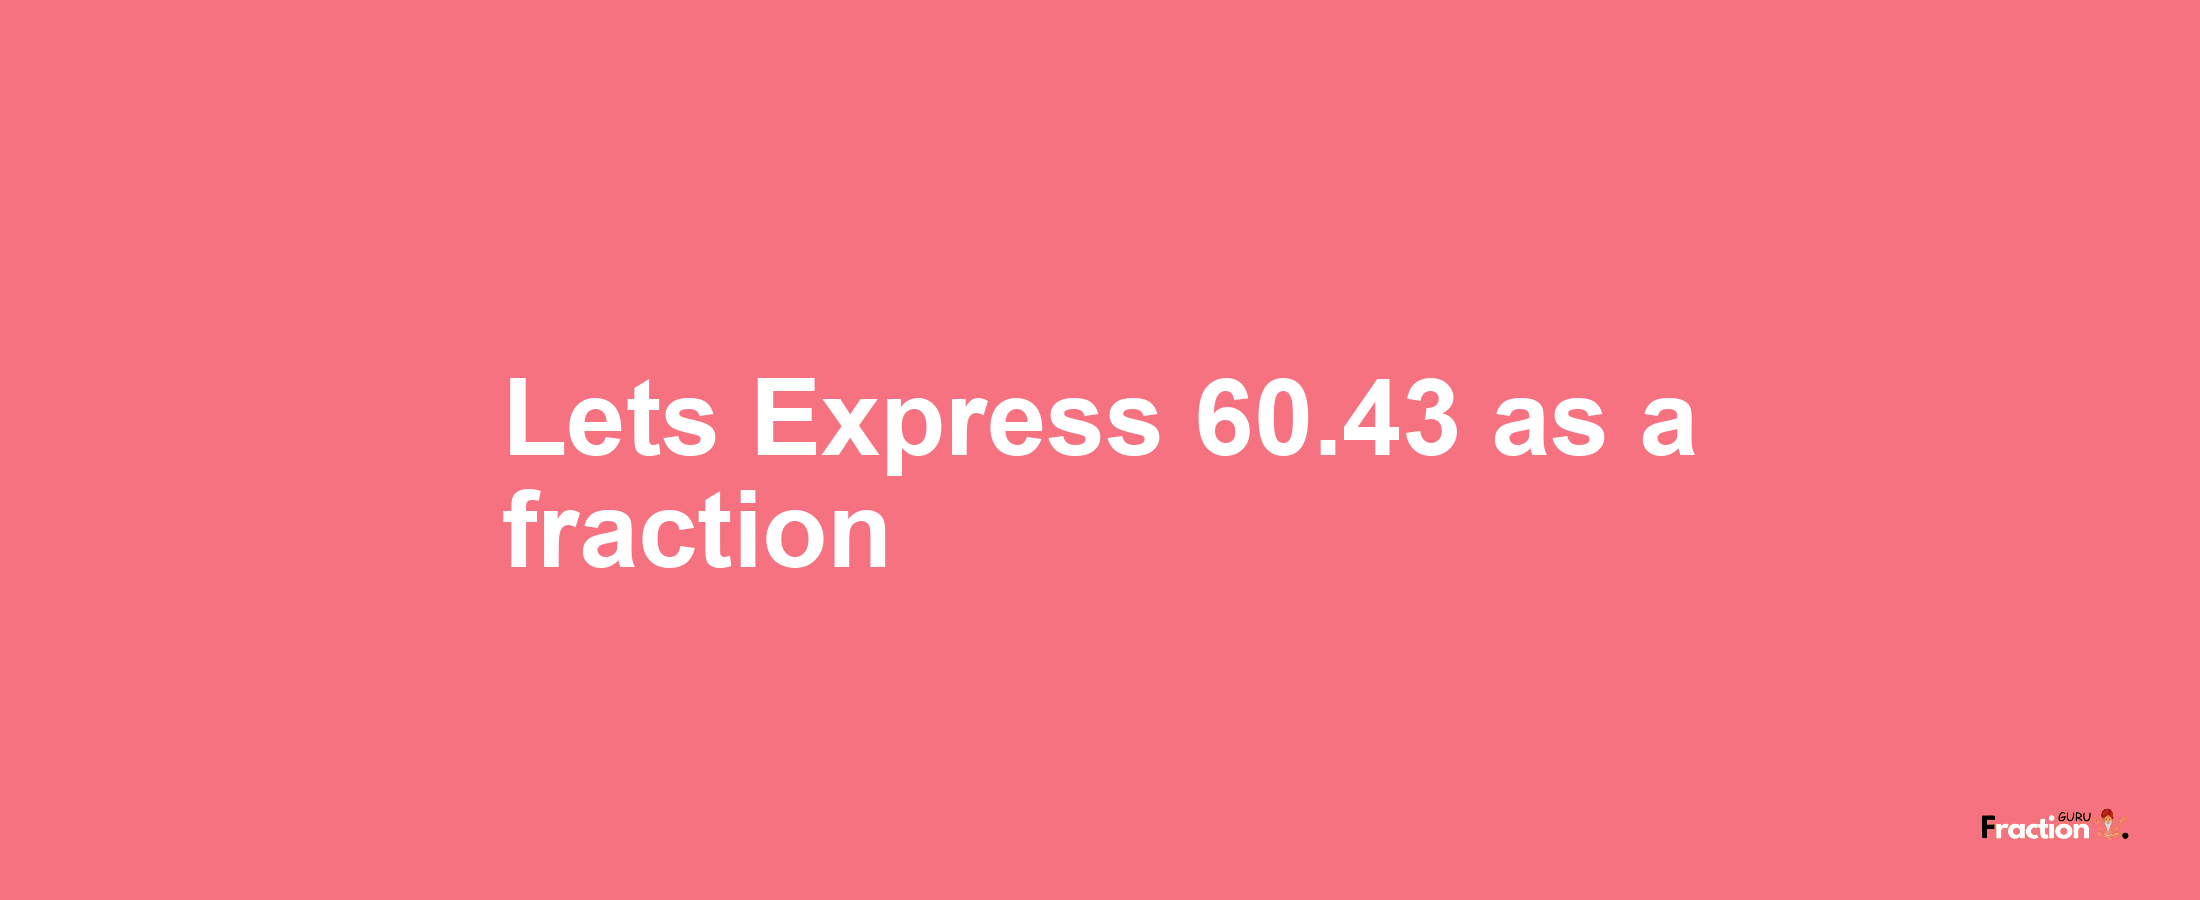 Lets Express 60.43 as afraction